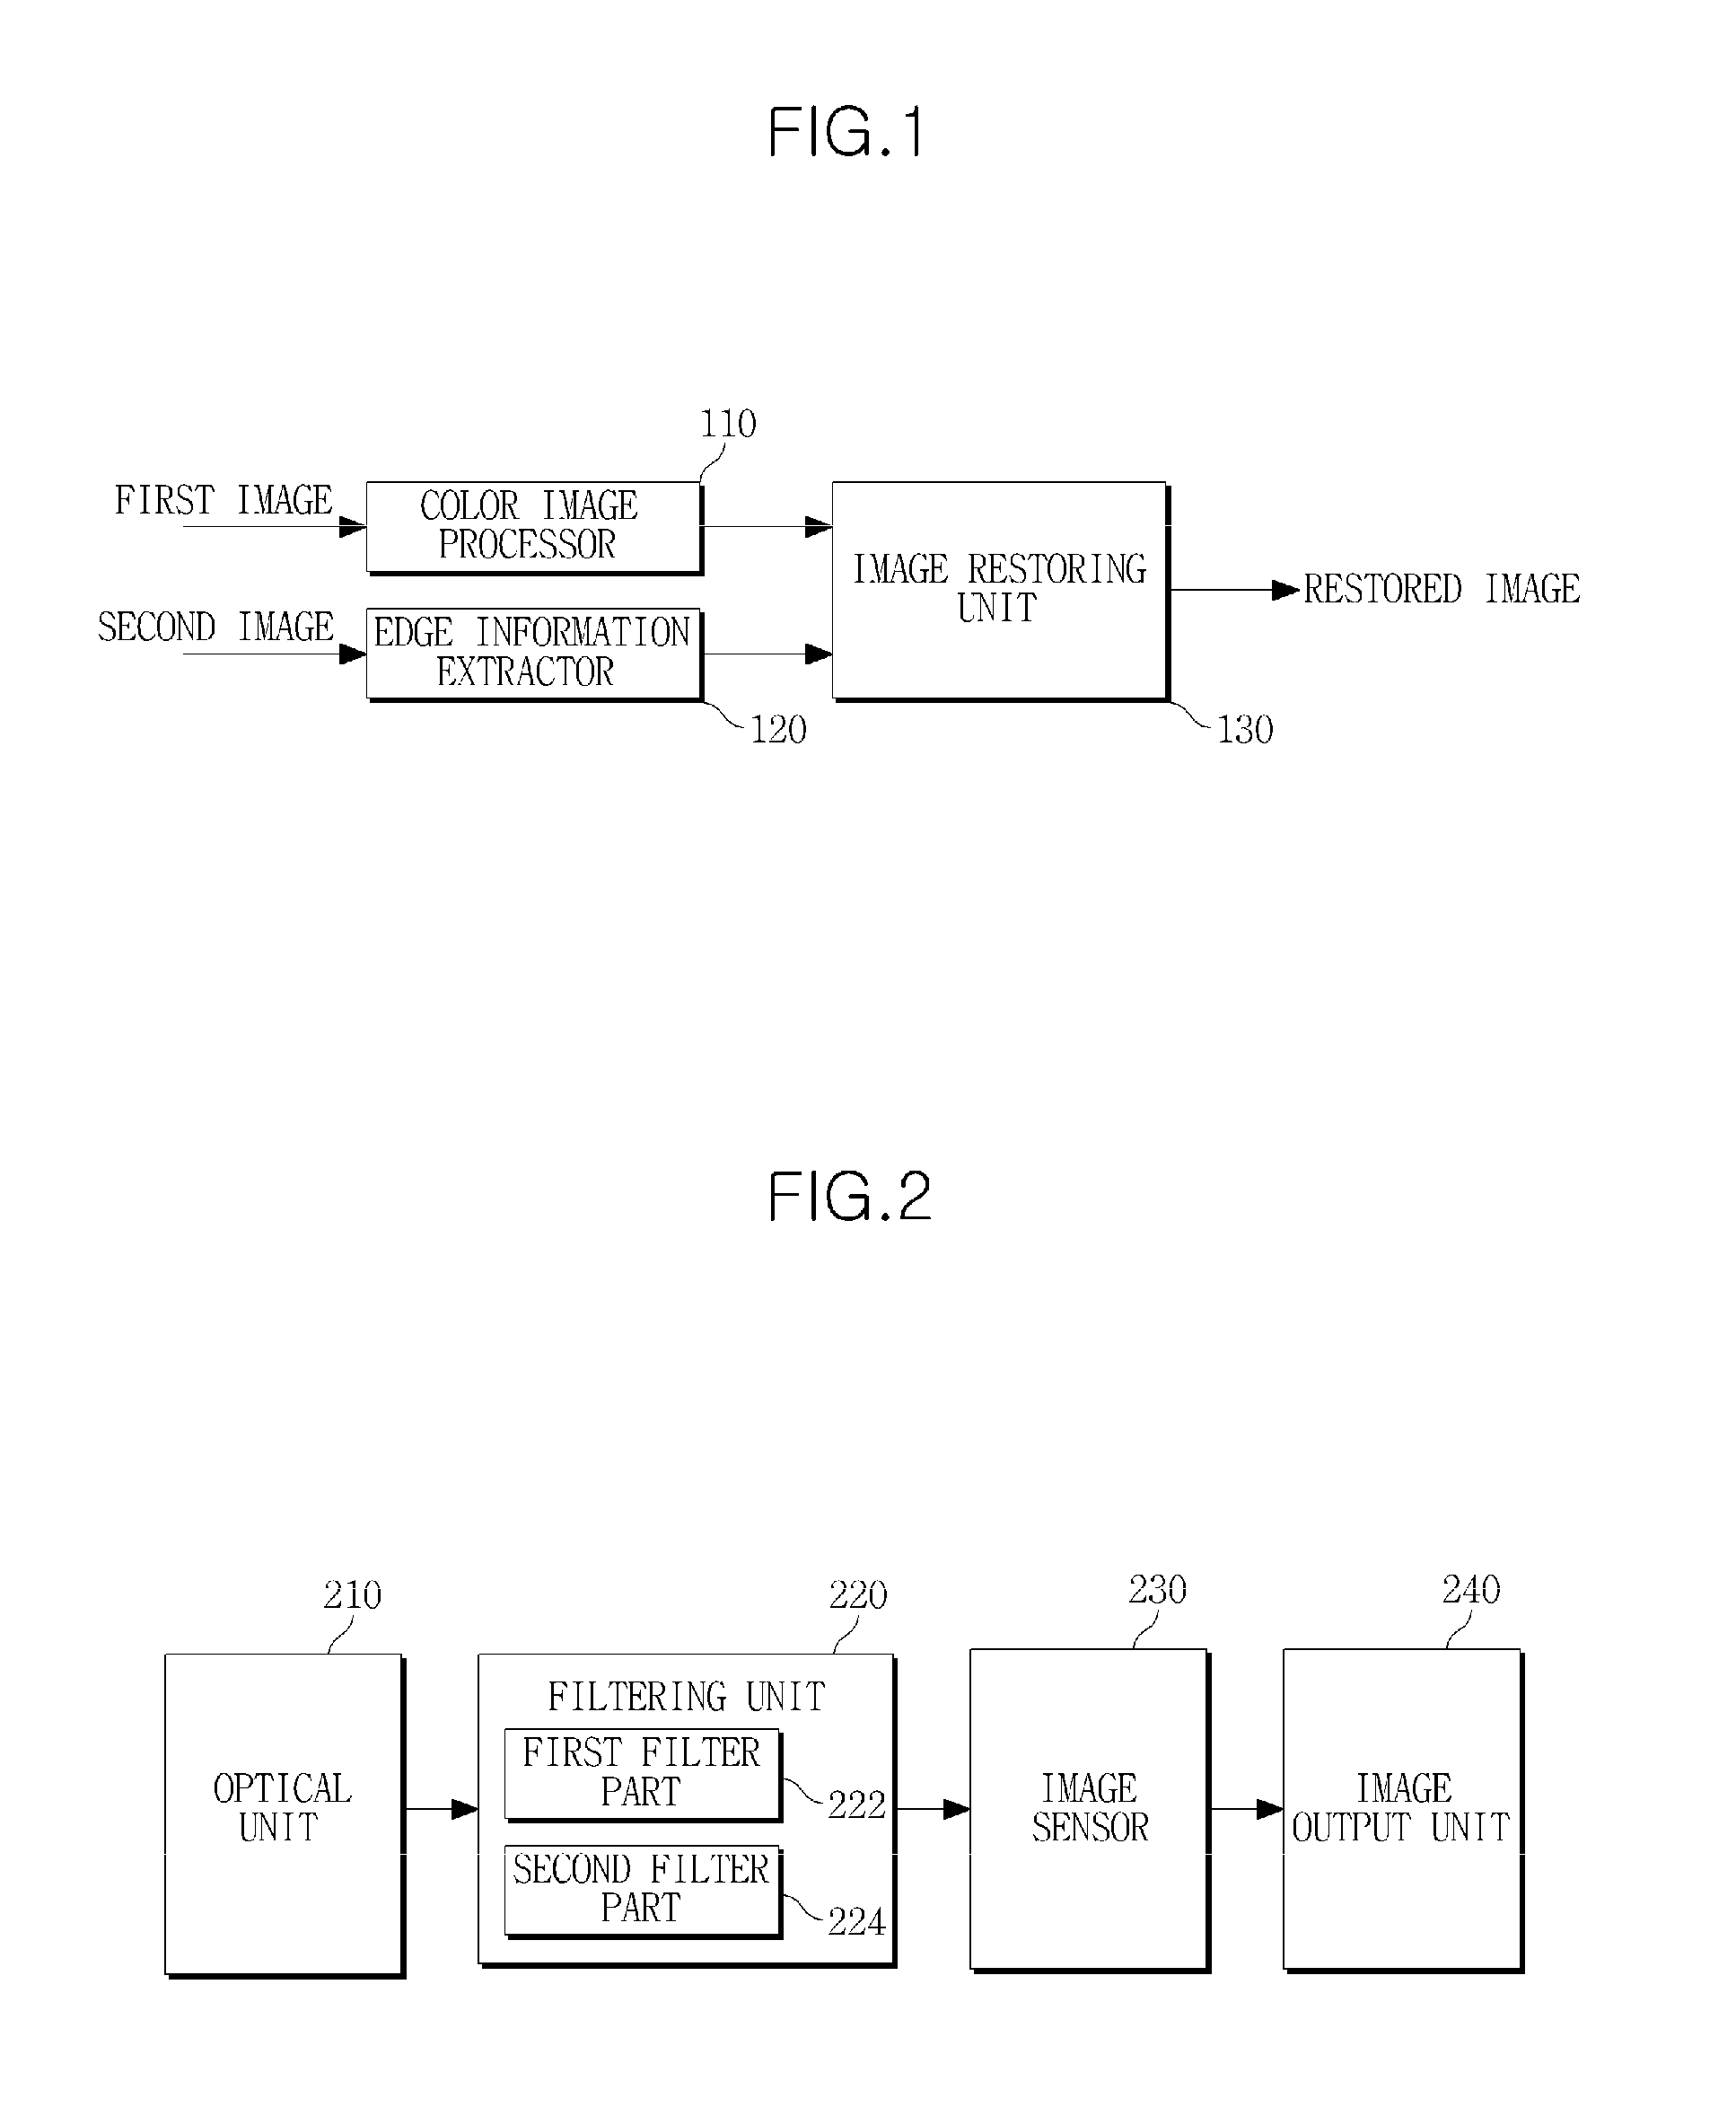 Image processing apparatus and method of providing high sensitive color images